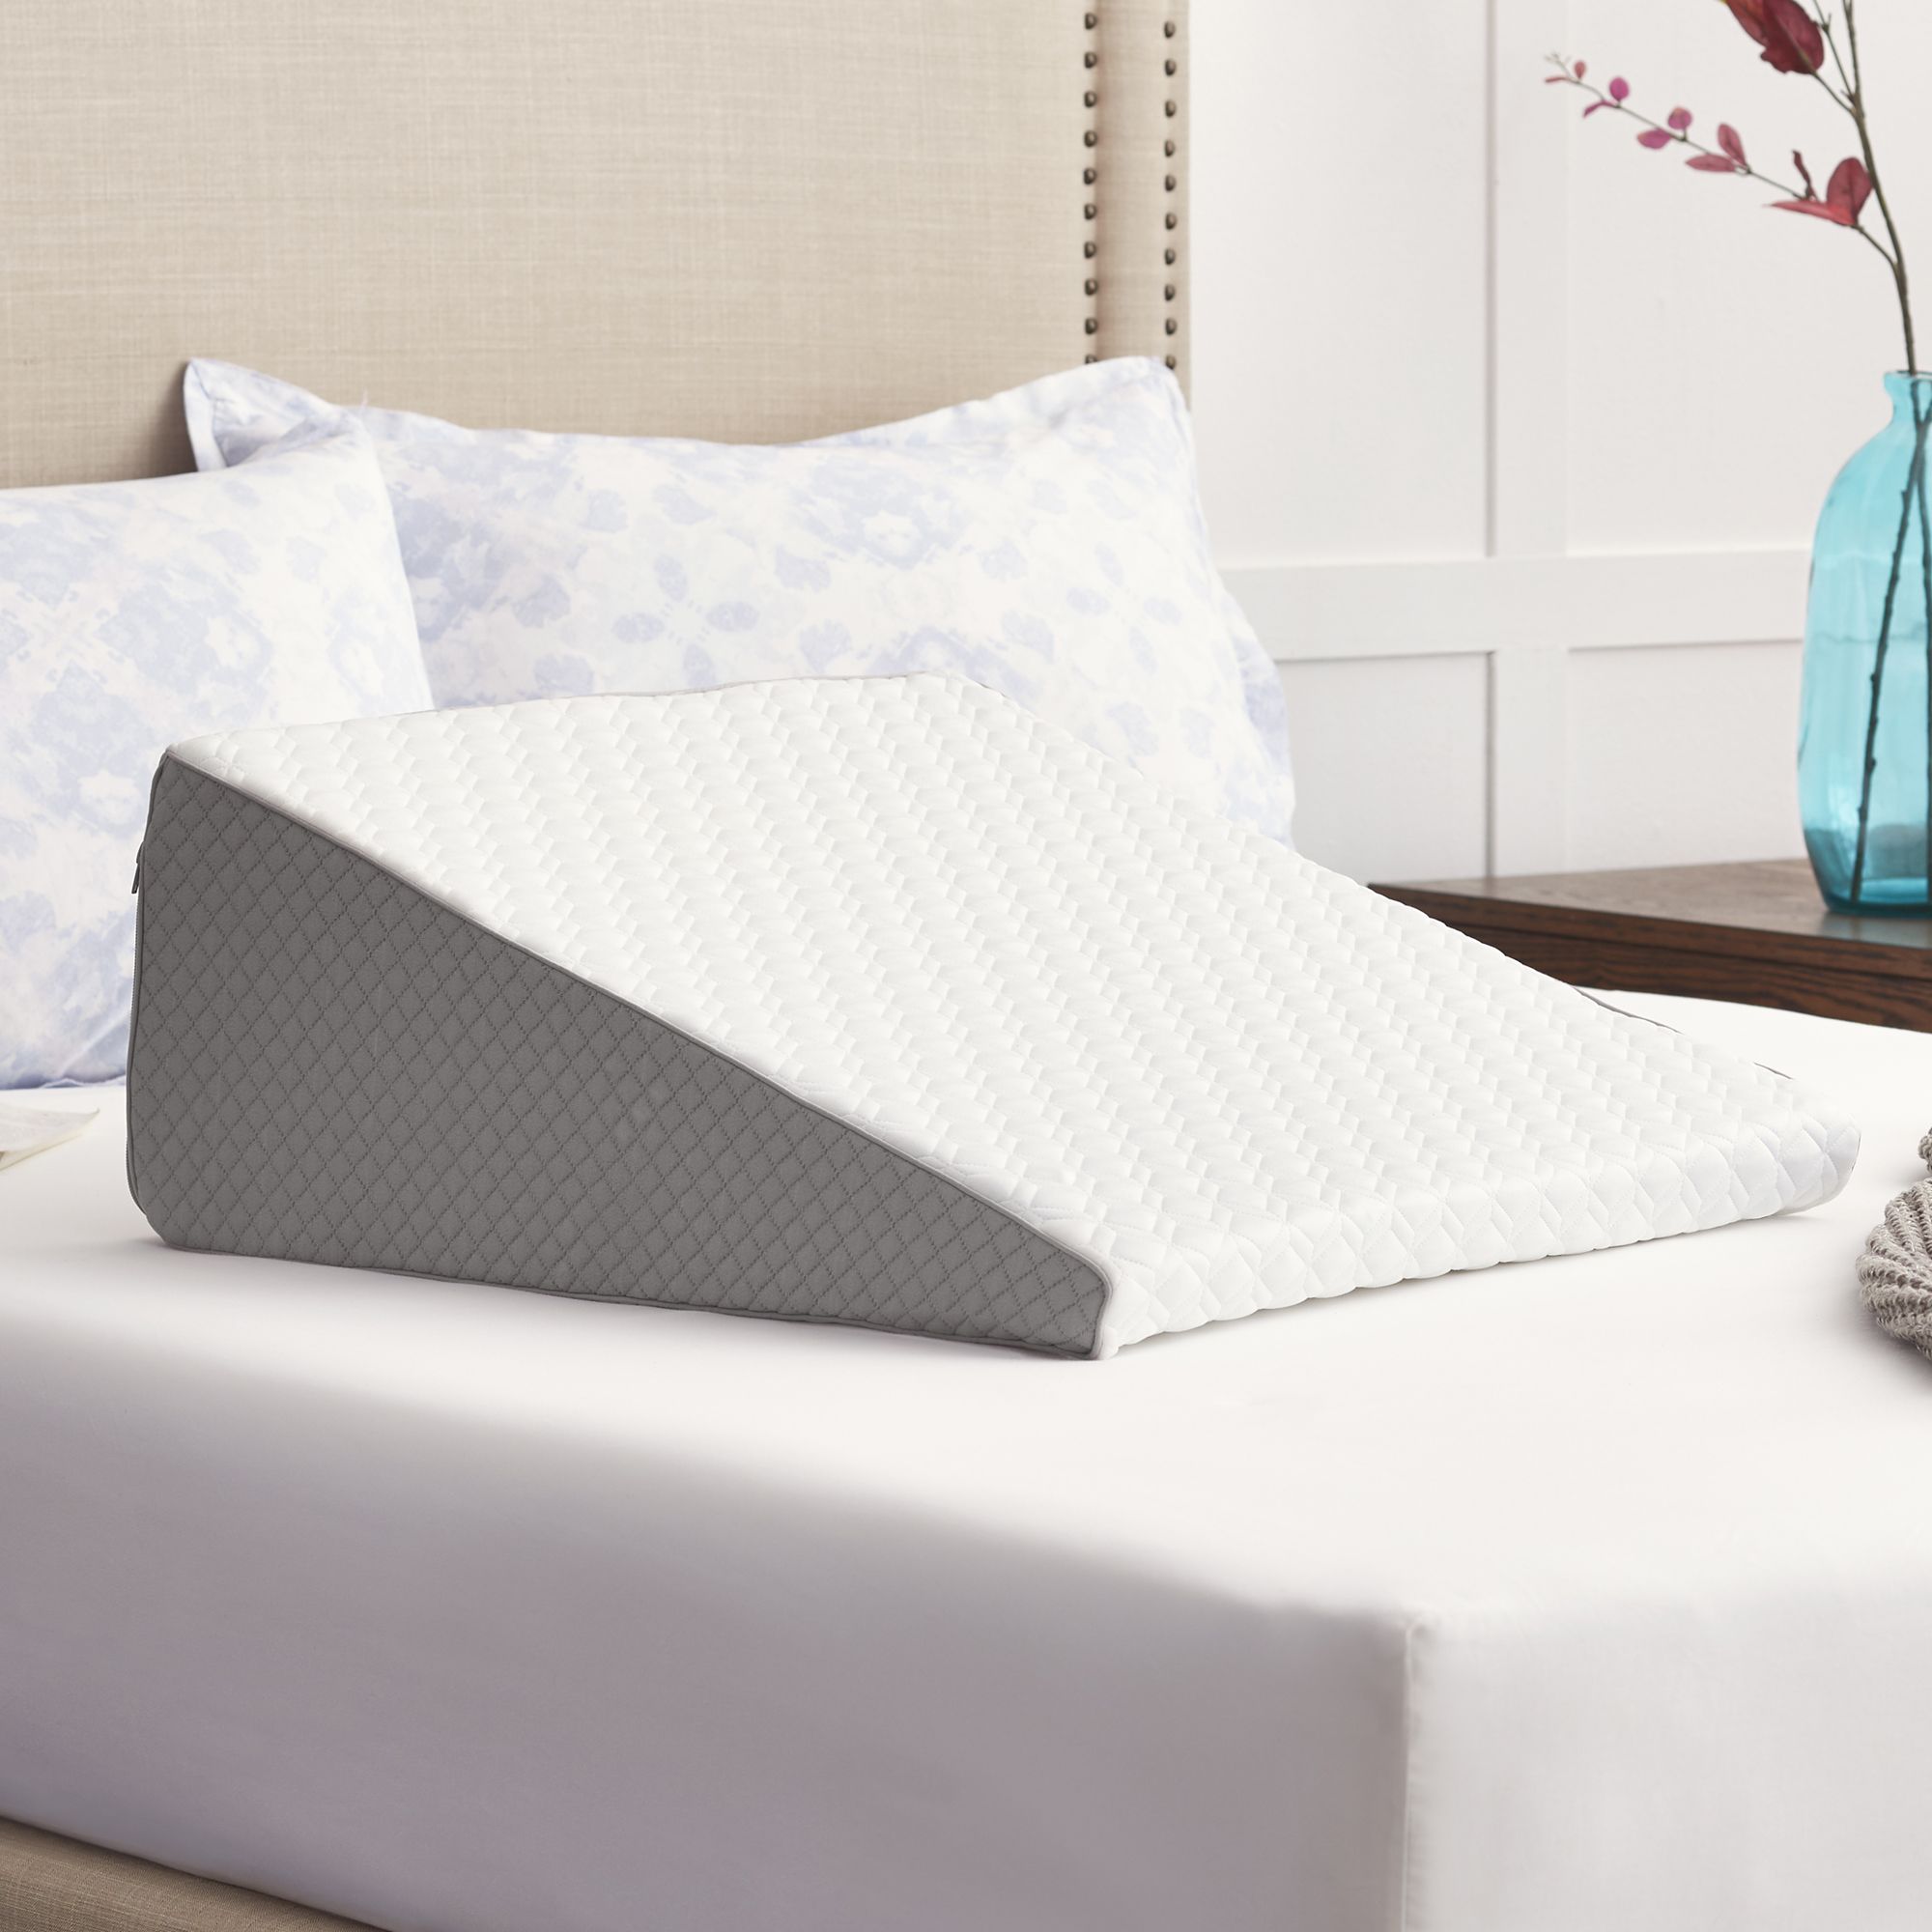 Sealy Extra Firm Support Standard/Queen Size Pillow